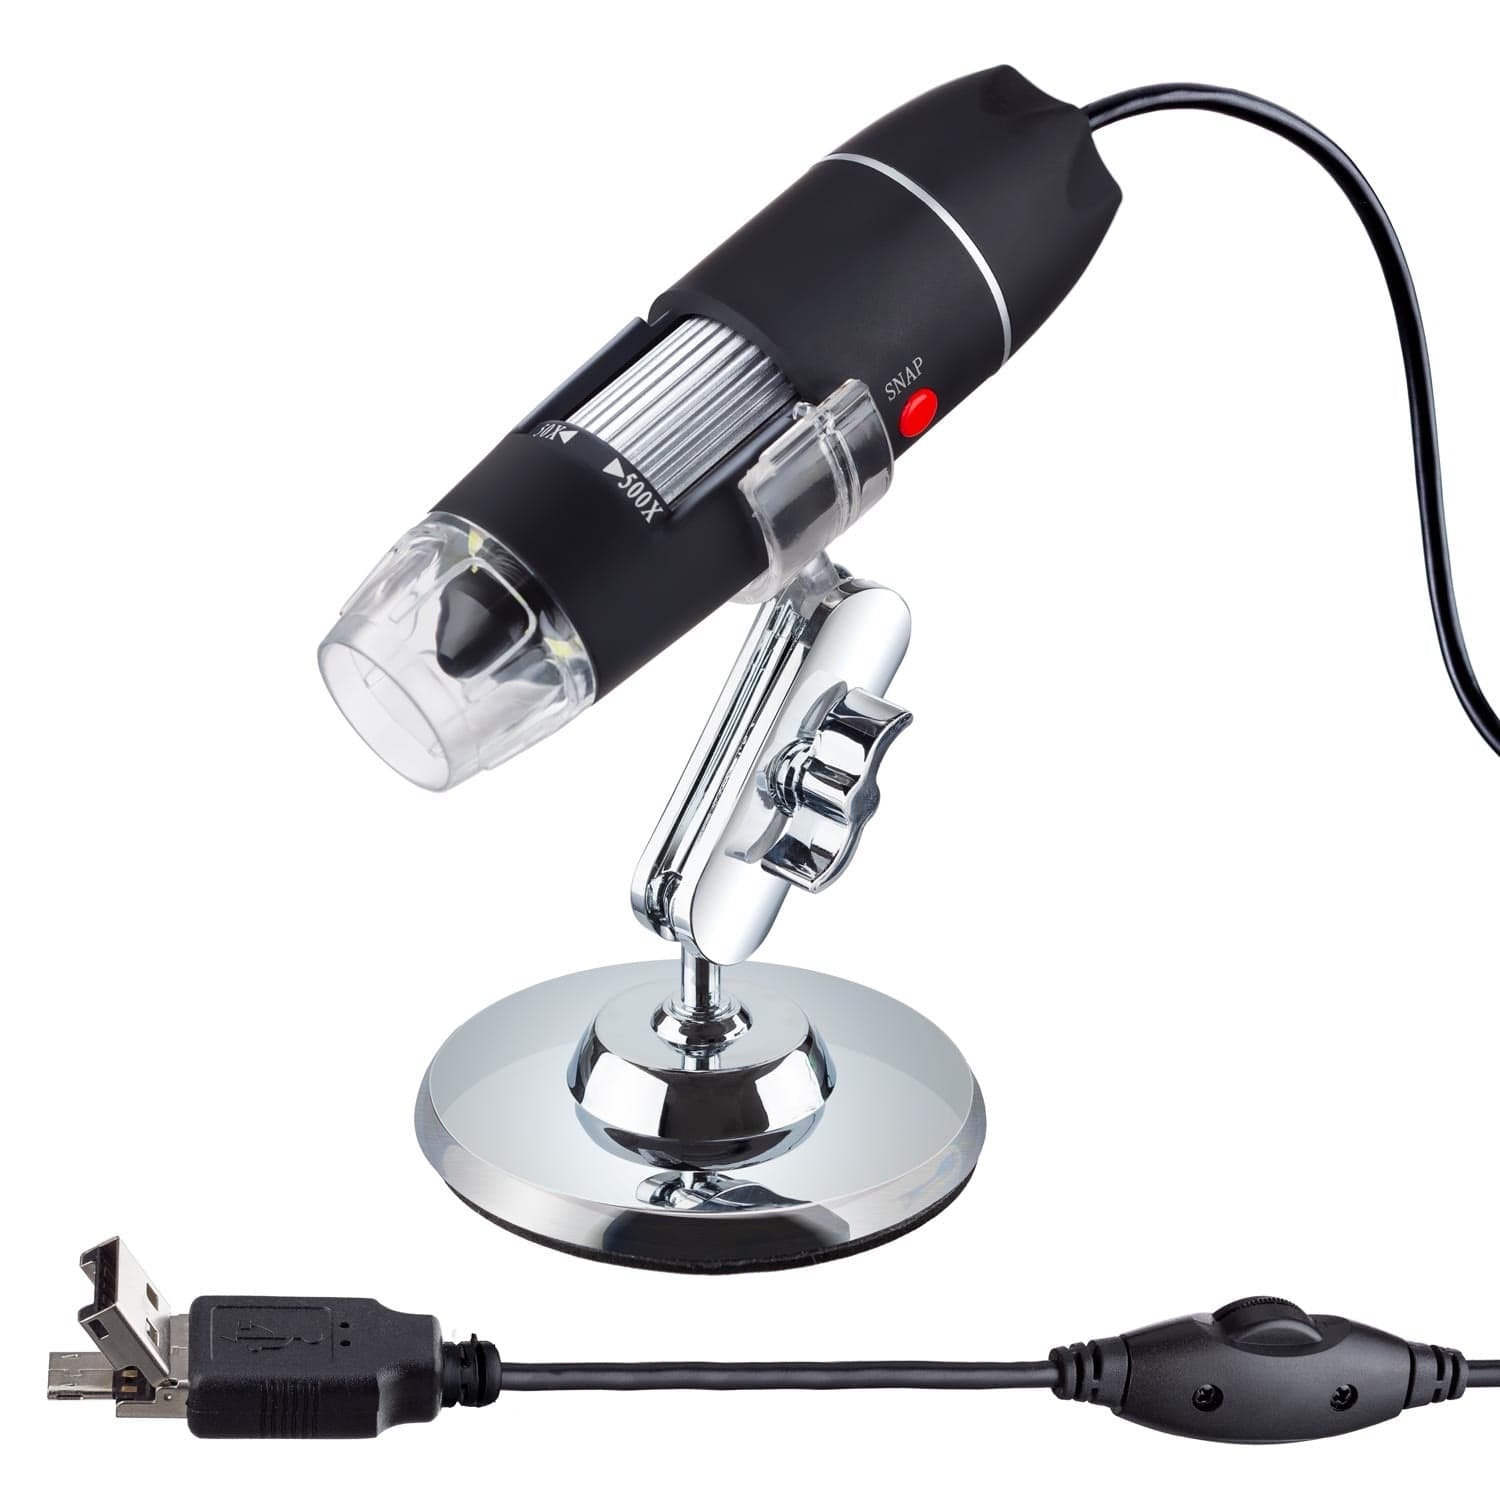 AmScope UWT Series 0.3MP Handheld Multi-USB Digital Microscope 50X-500X  Magnification on Simple Stand with LED Illumination for PC and Android